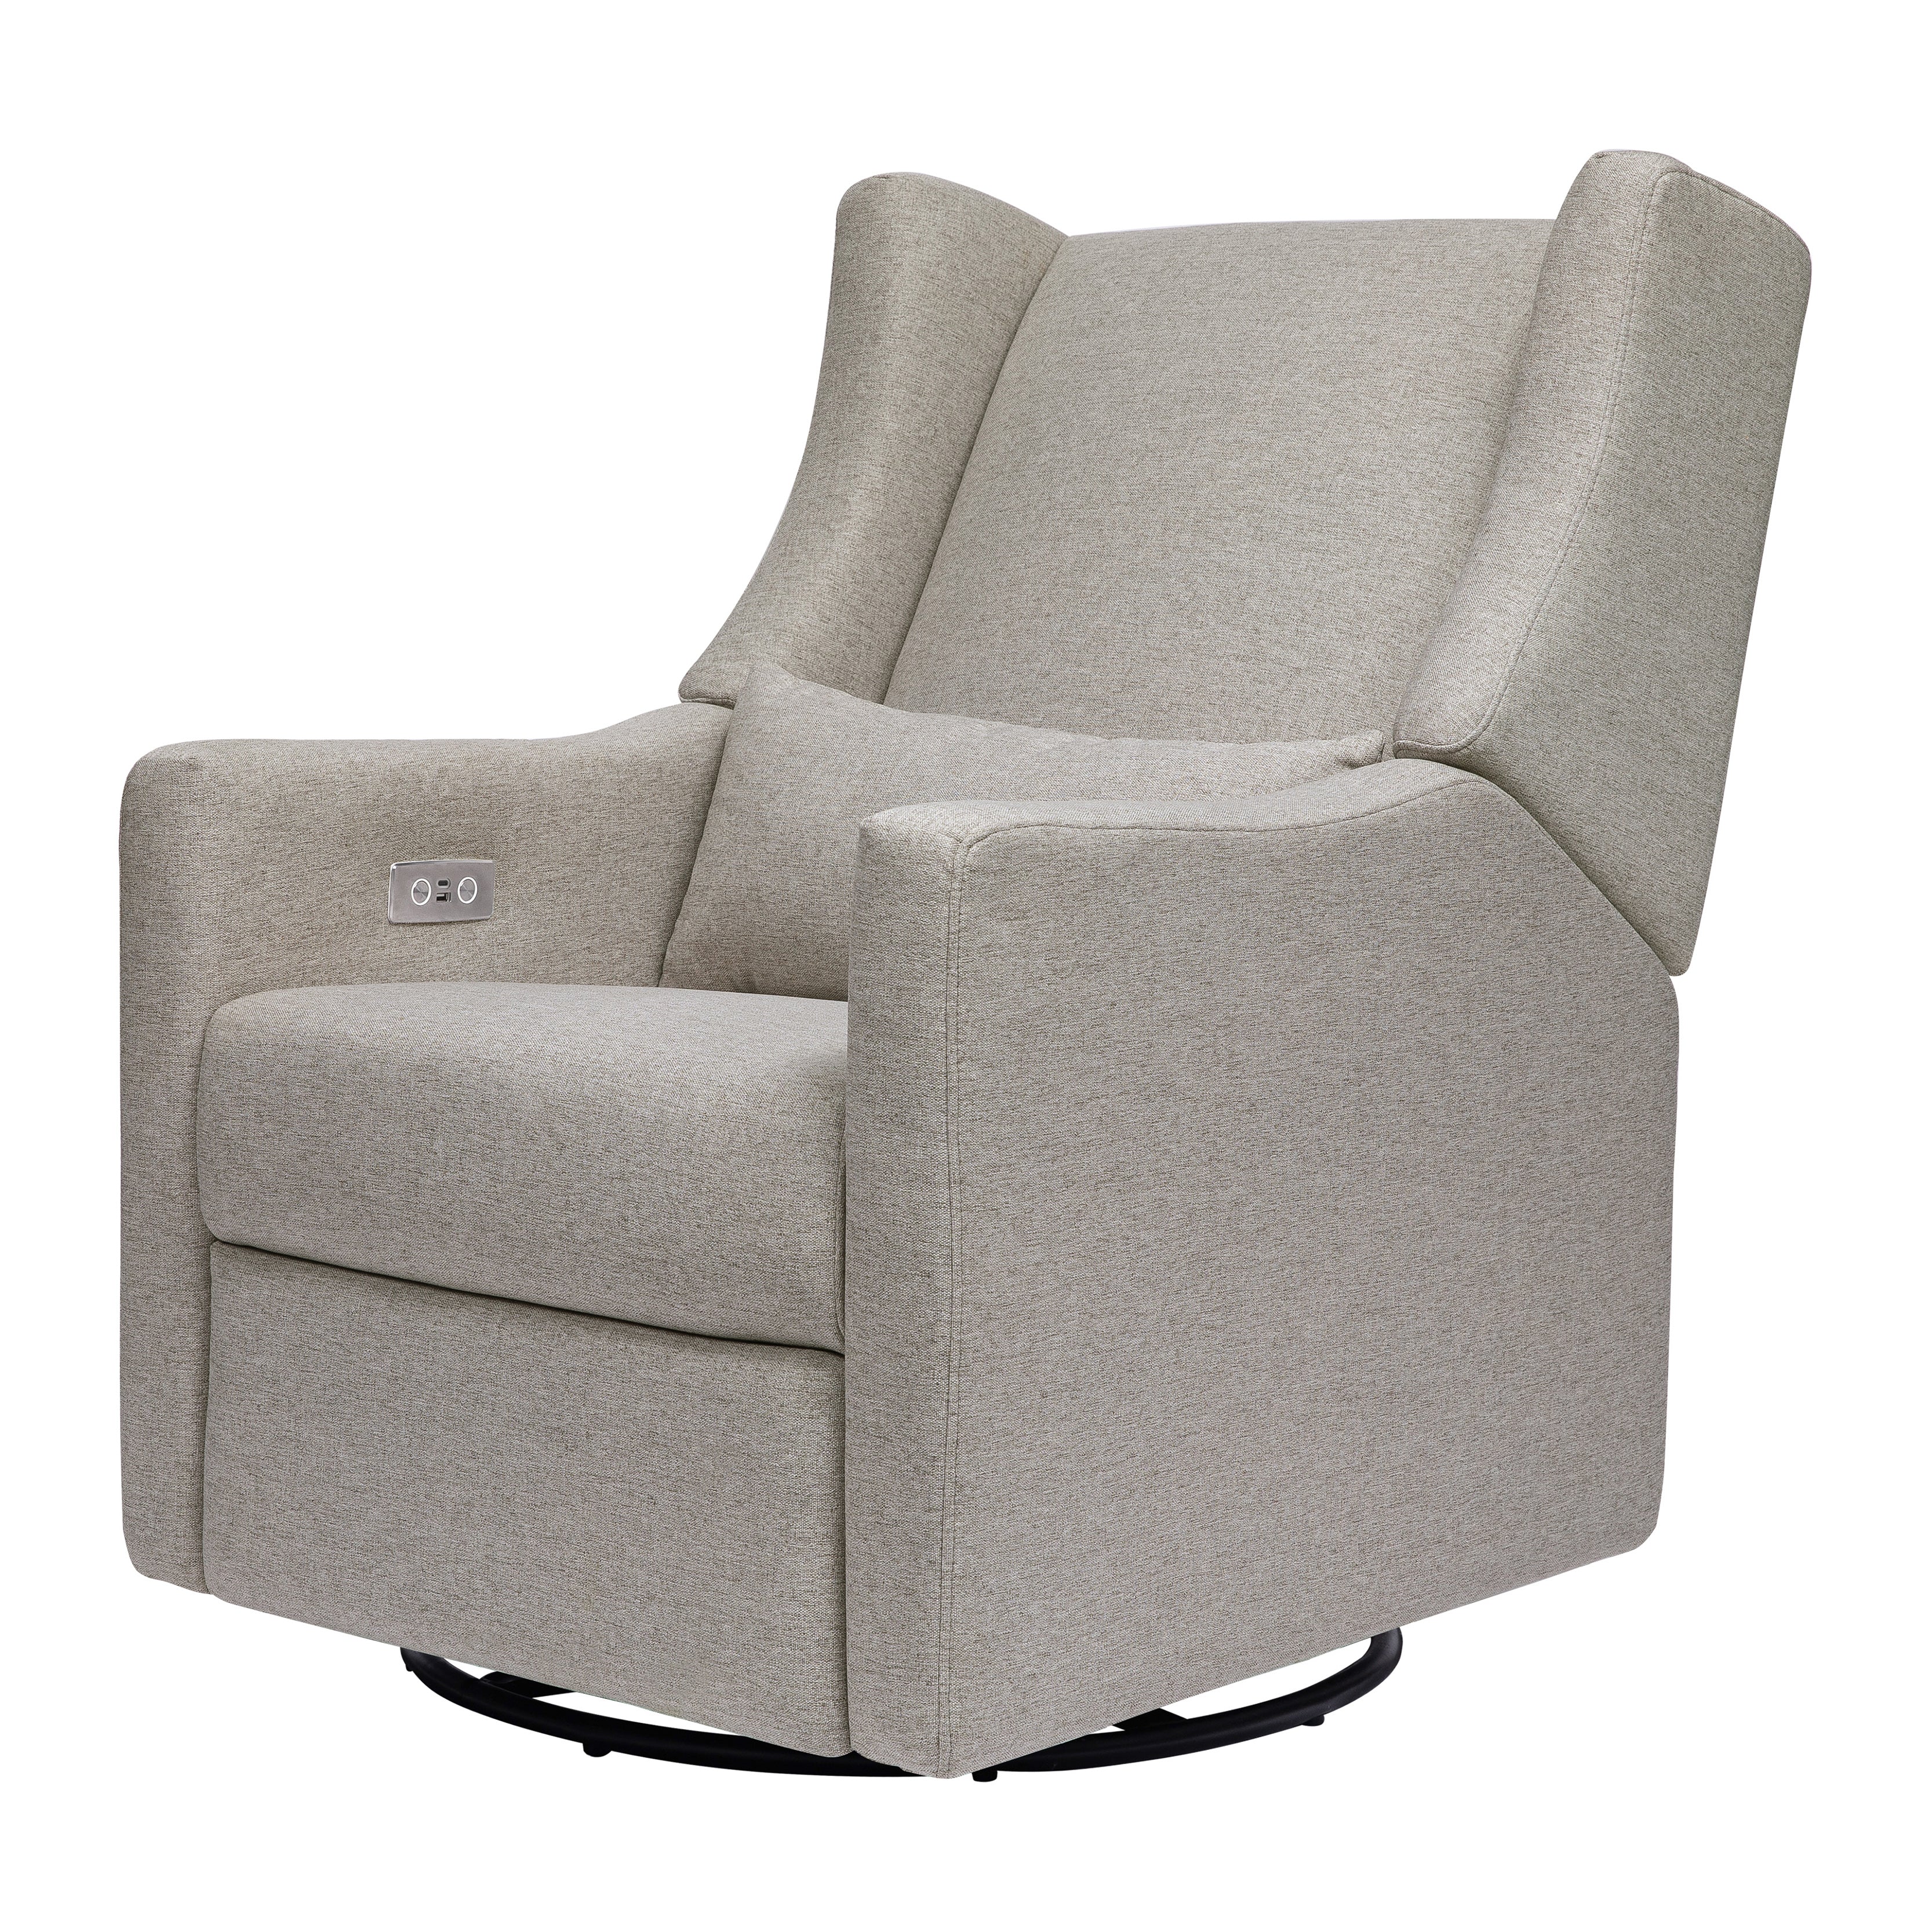 This comfortable recliner is the perfect addition to any child's room. Perfect for reading time cuddles, and relaxing naps.